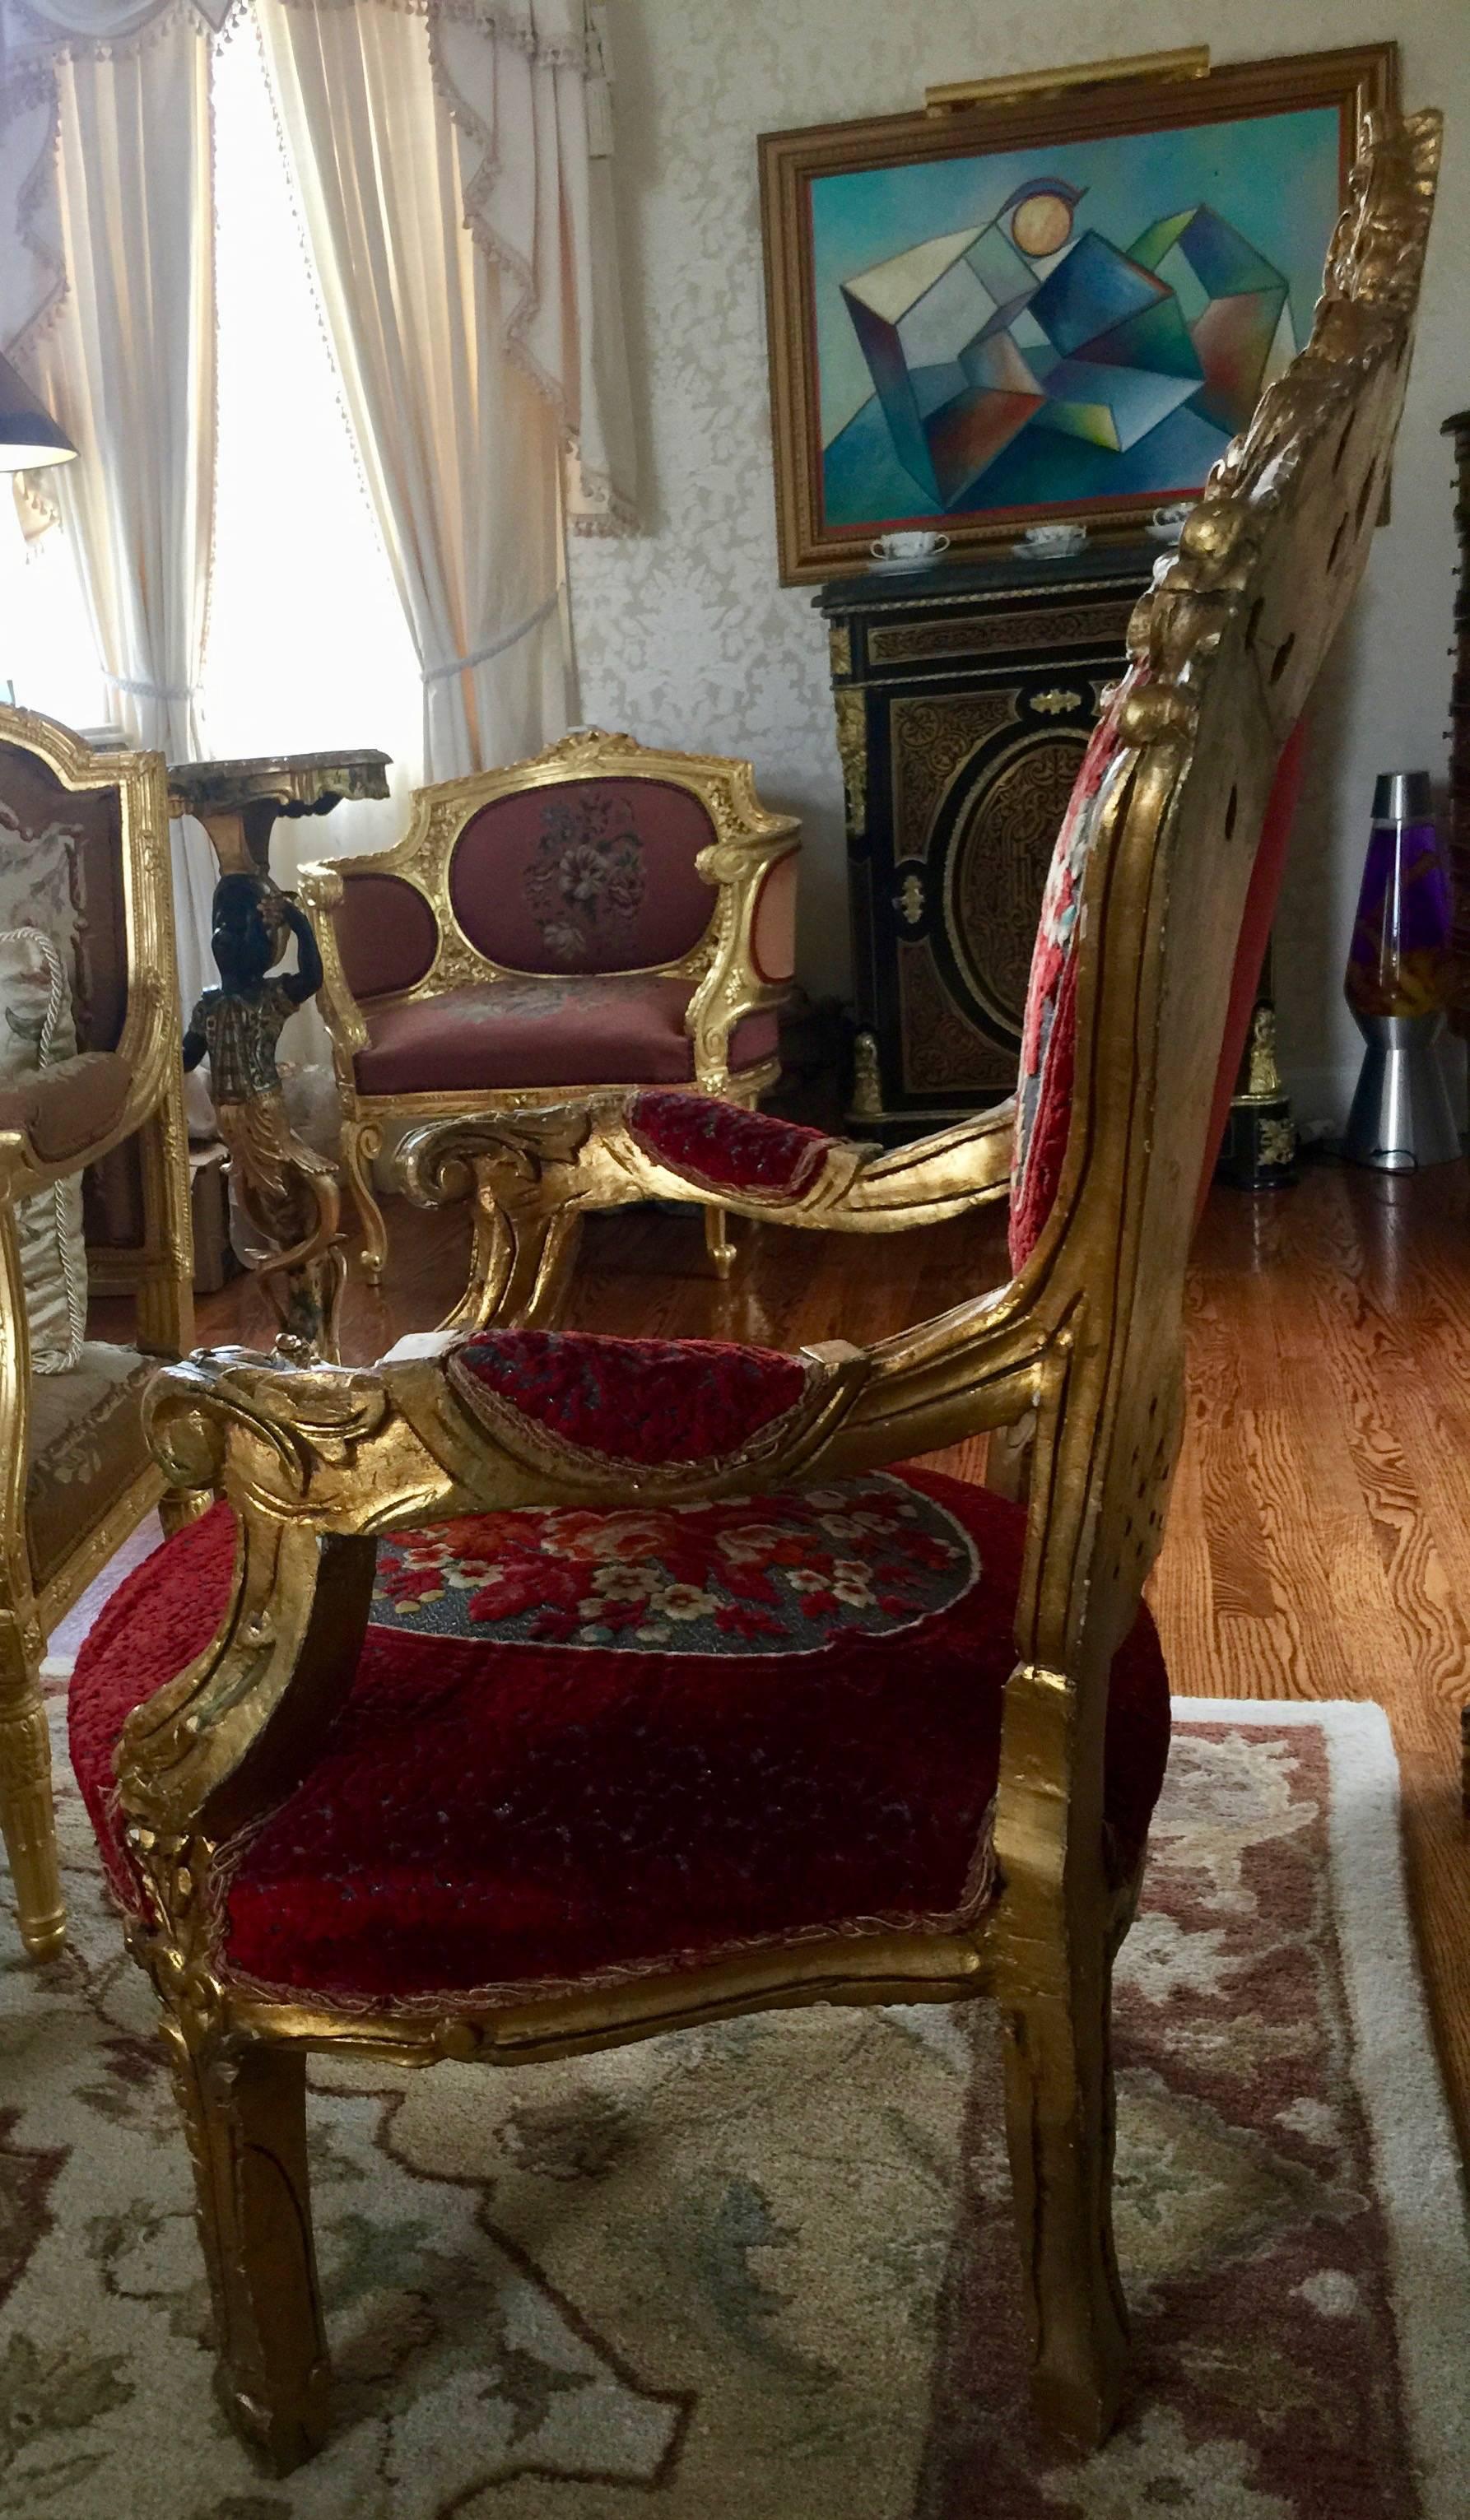 Exceptional original 18th century gilded Rococo chair 

Presented is an original 18th century  French Rococo chair  
The chair is in excellent condition for age with some loose thread and tiny nicks/wear as expected. See photos.
This exceptional